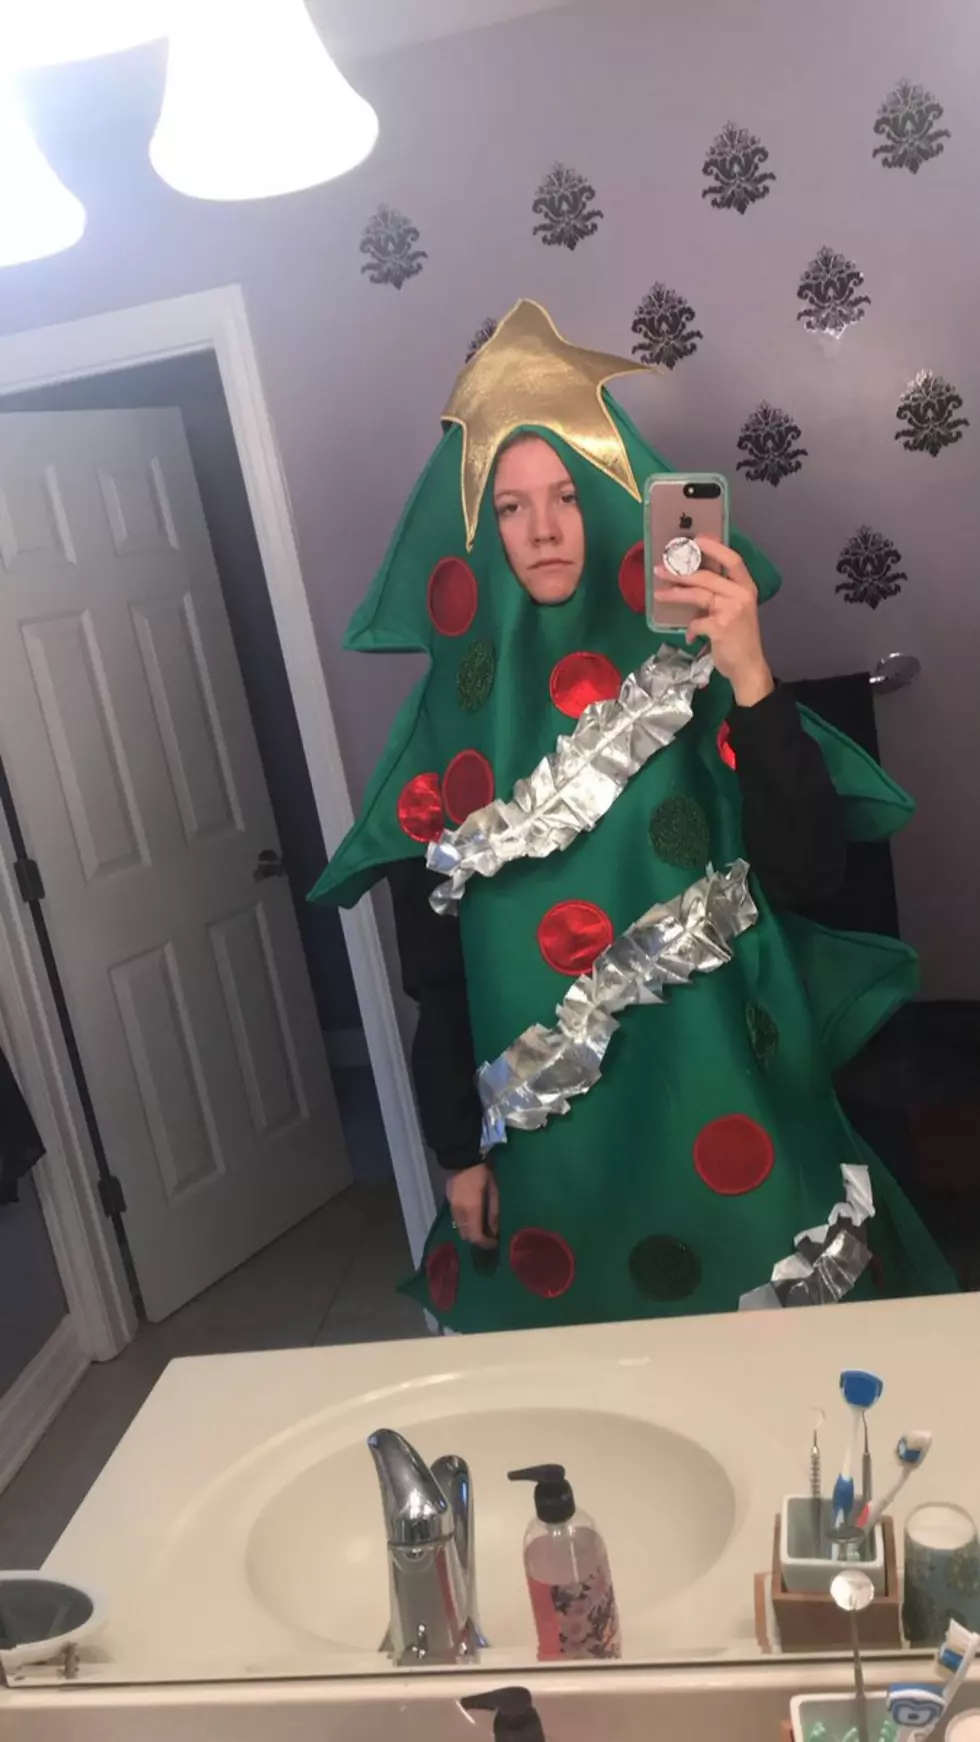 Alabama Student Wearing Tree Costume to Class After 1,000 Retweets